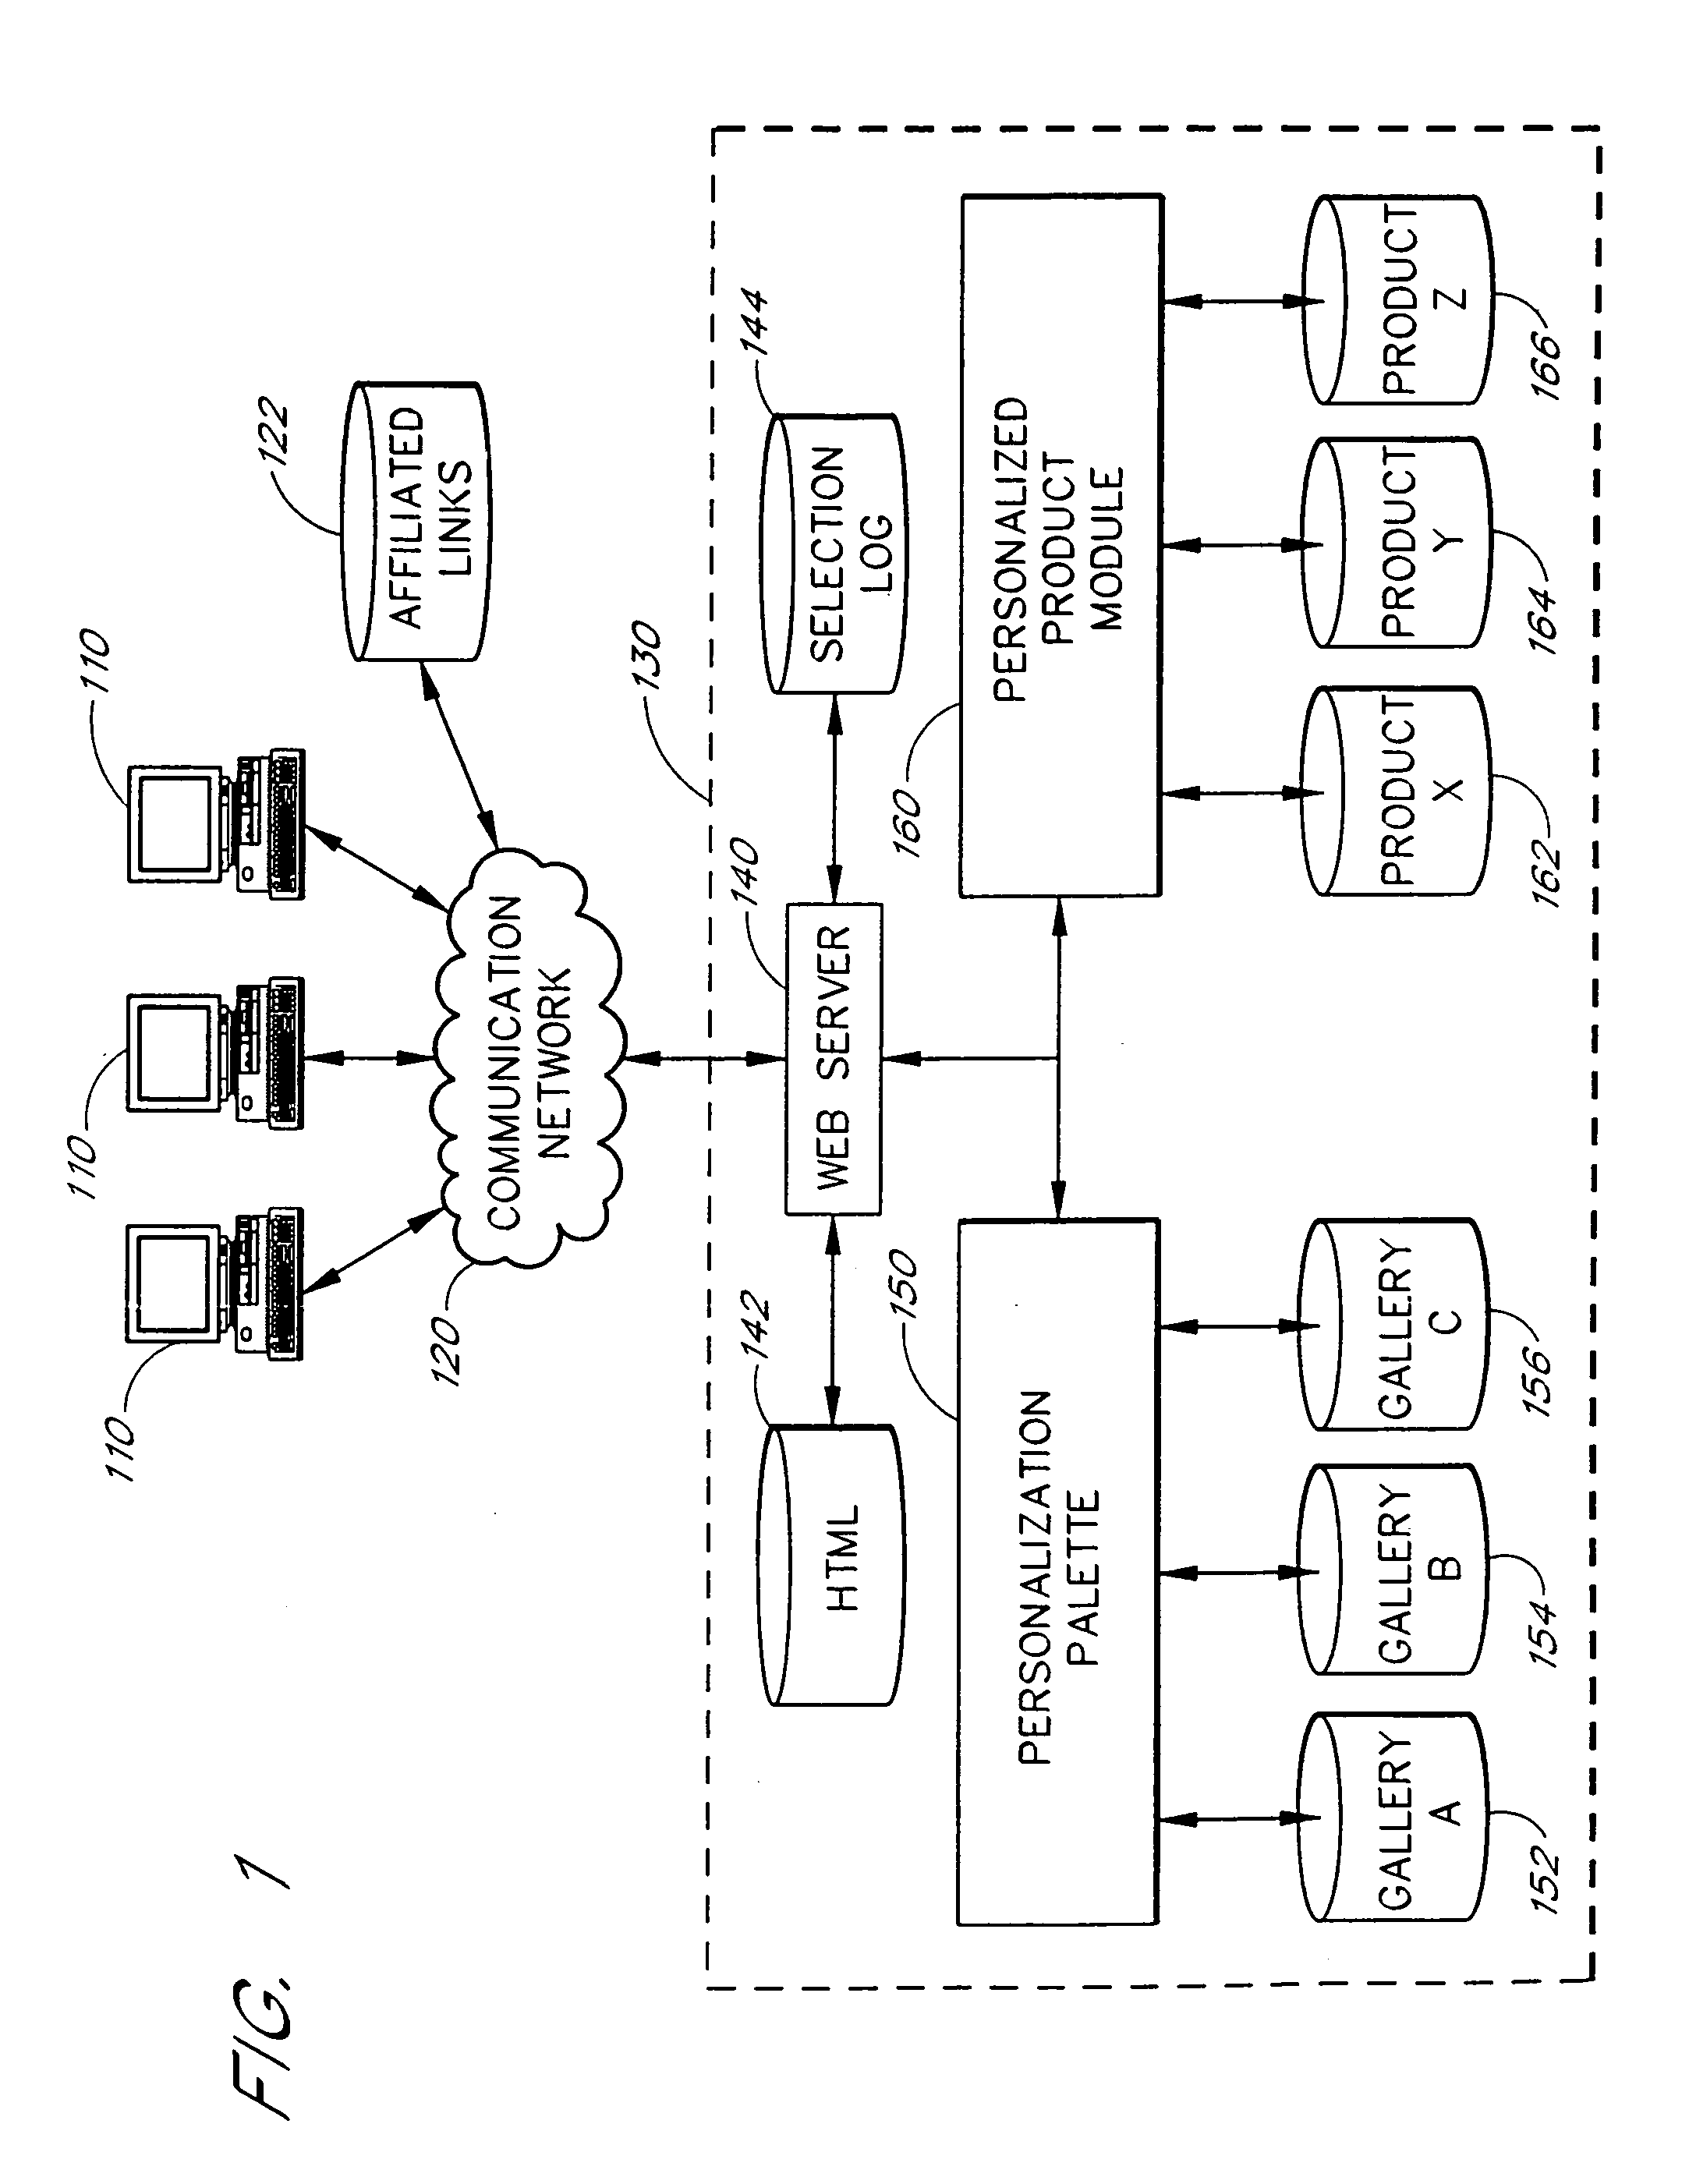 Intelligent personalization system and method